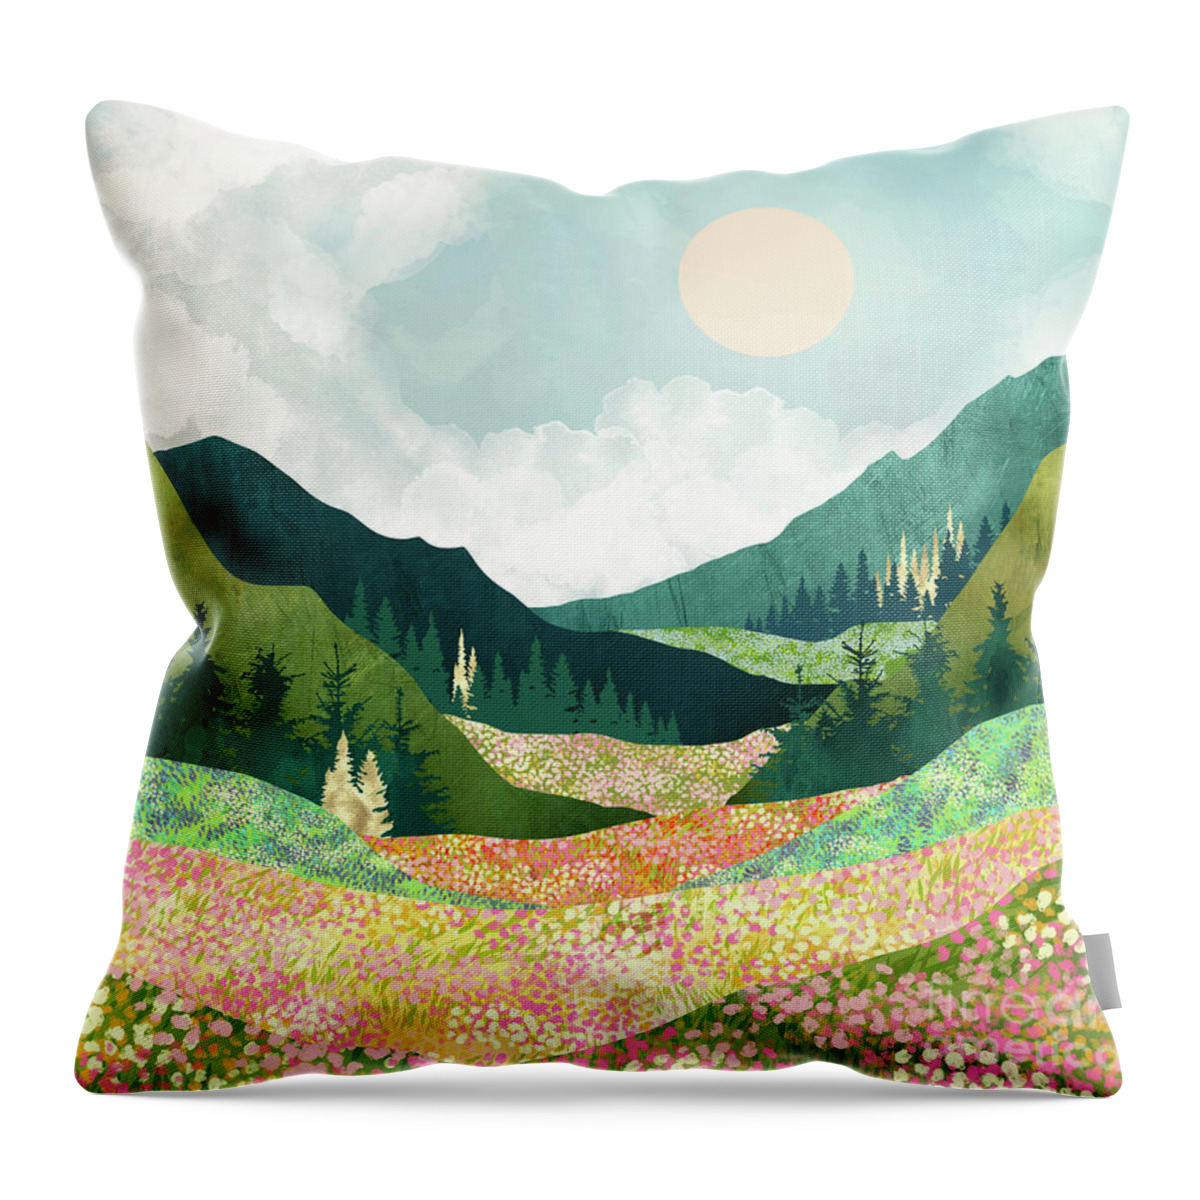 Spring Throw Pillow featuring the digital art Spring Flower Vista by Spacefrog Designs